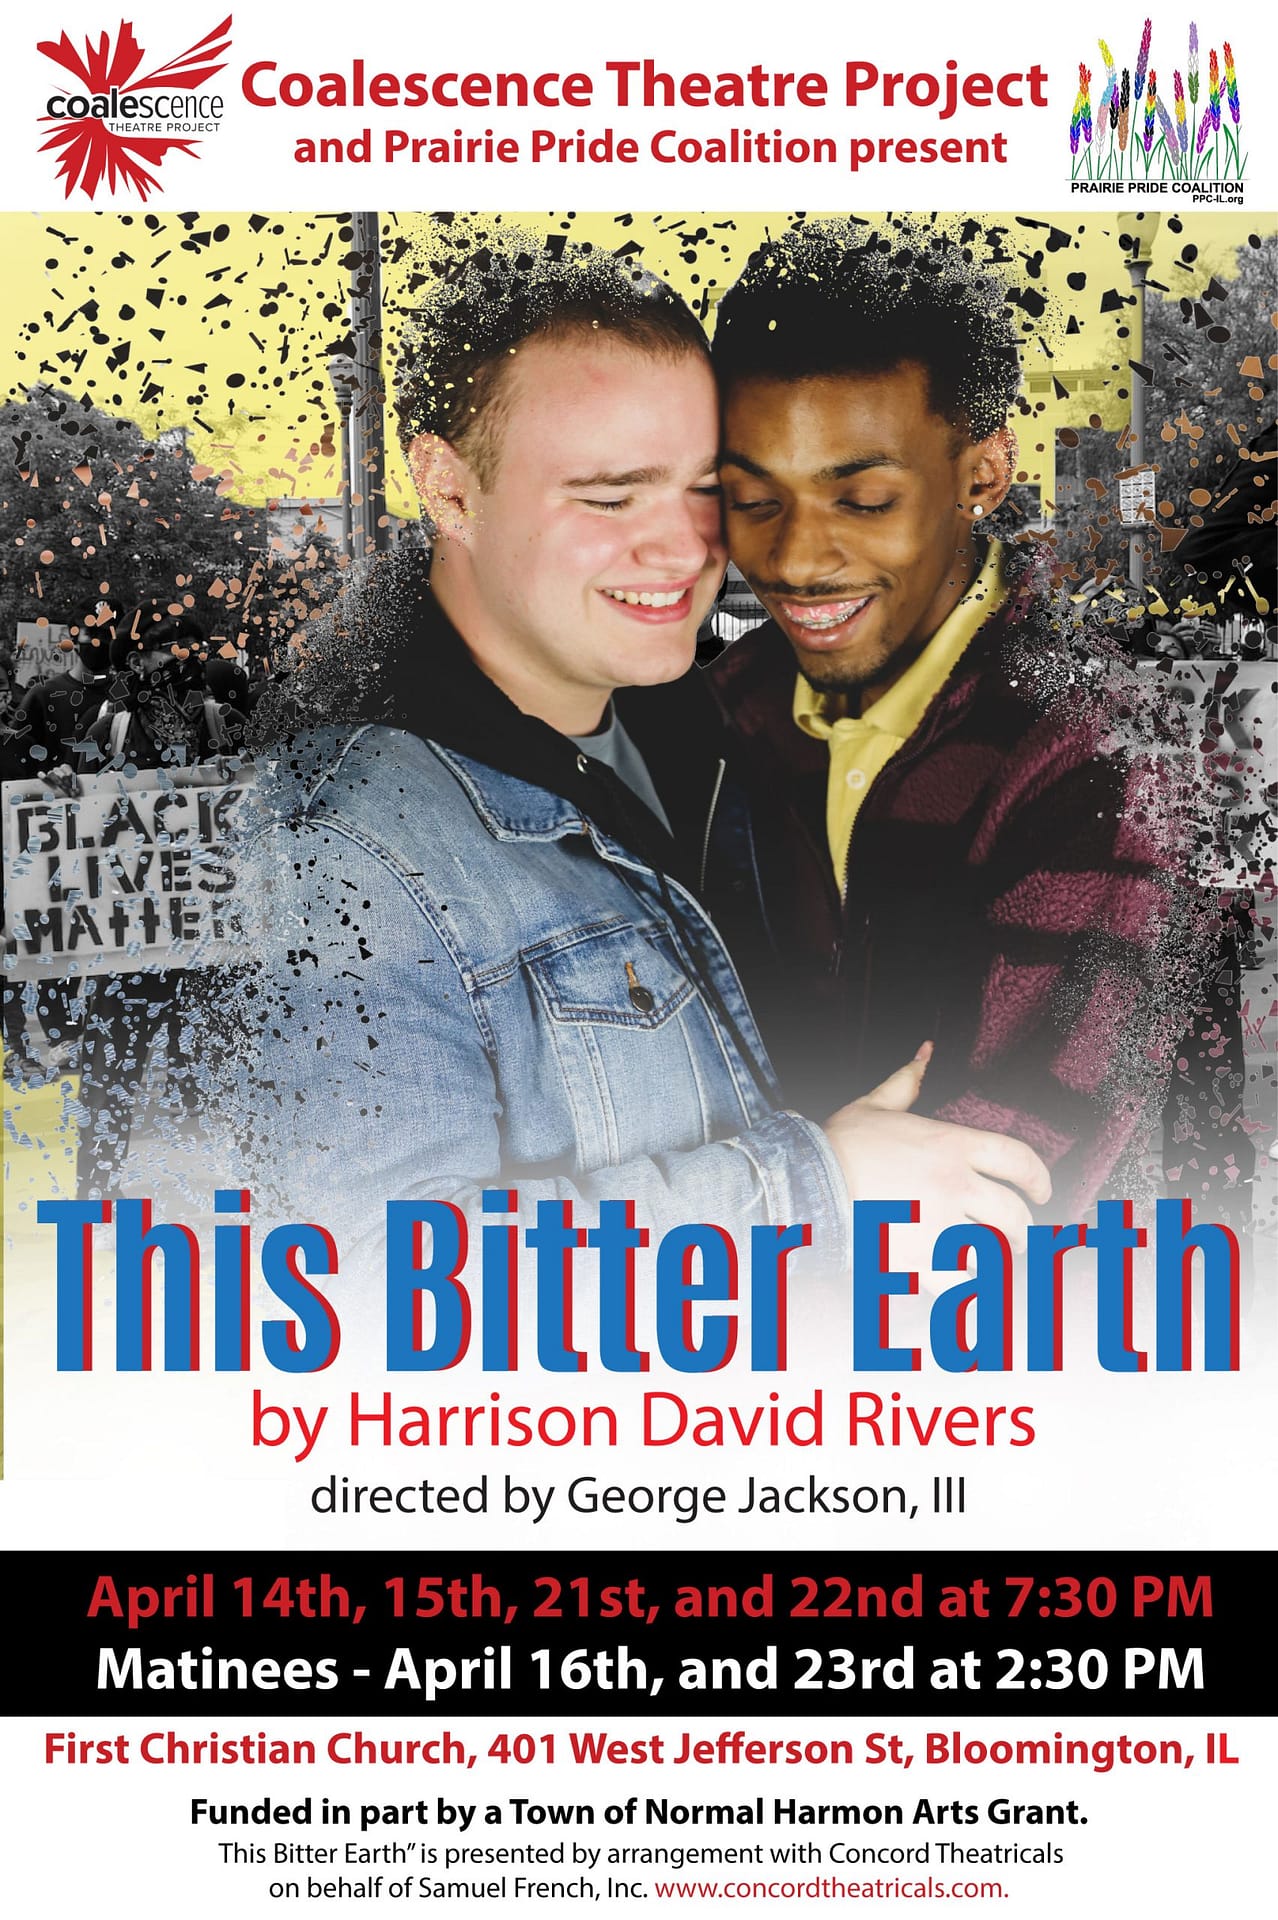 This Bitter Earth play advertisement featuring a black and white male gay couple. One of the guys is an activist for the Black Lives Matter Movement.